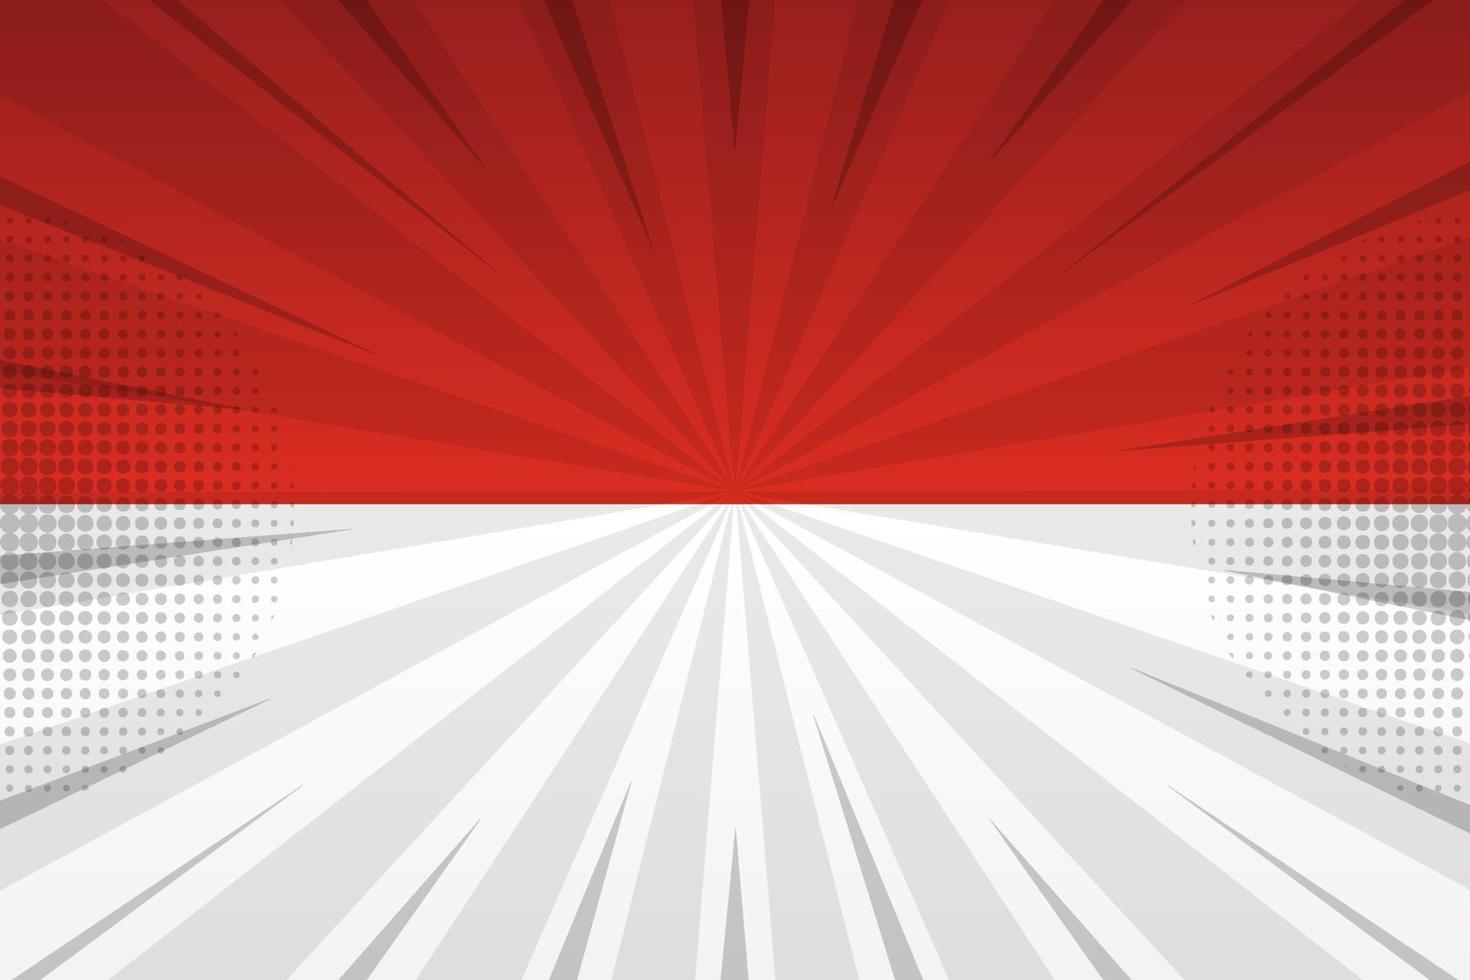 indonesia flag background concept for indonesia independence day illustration vector